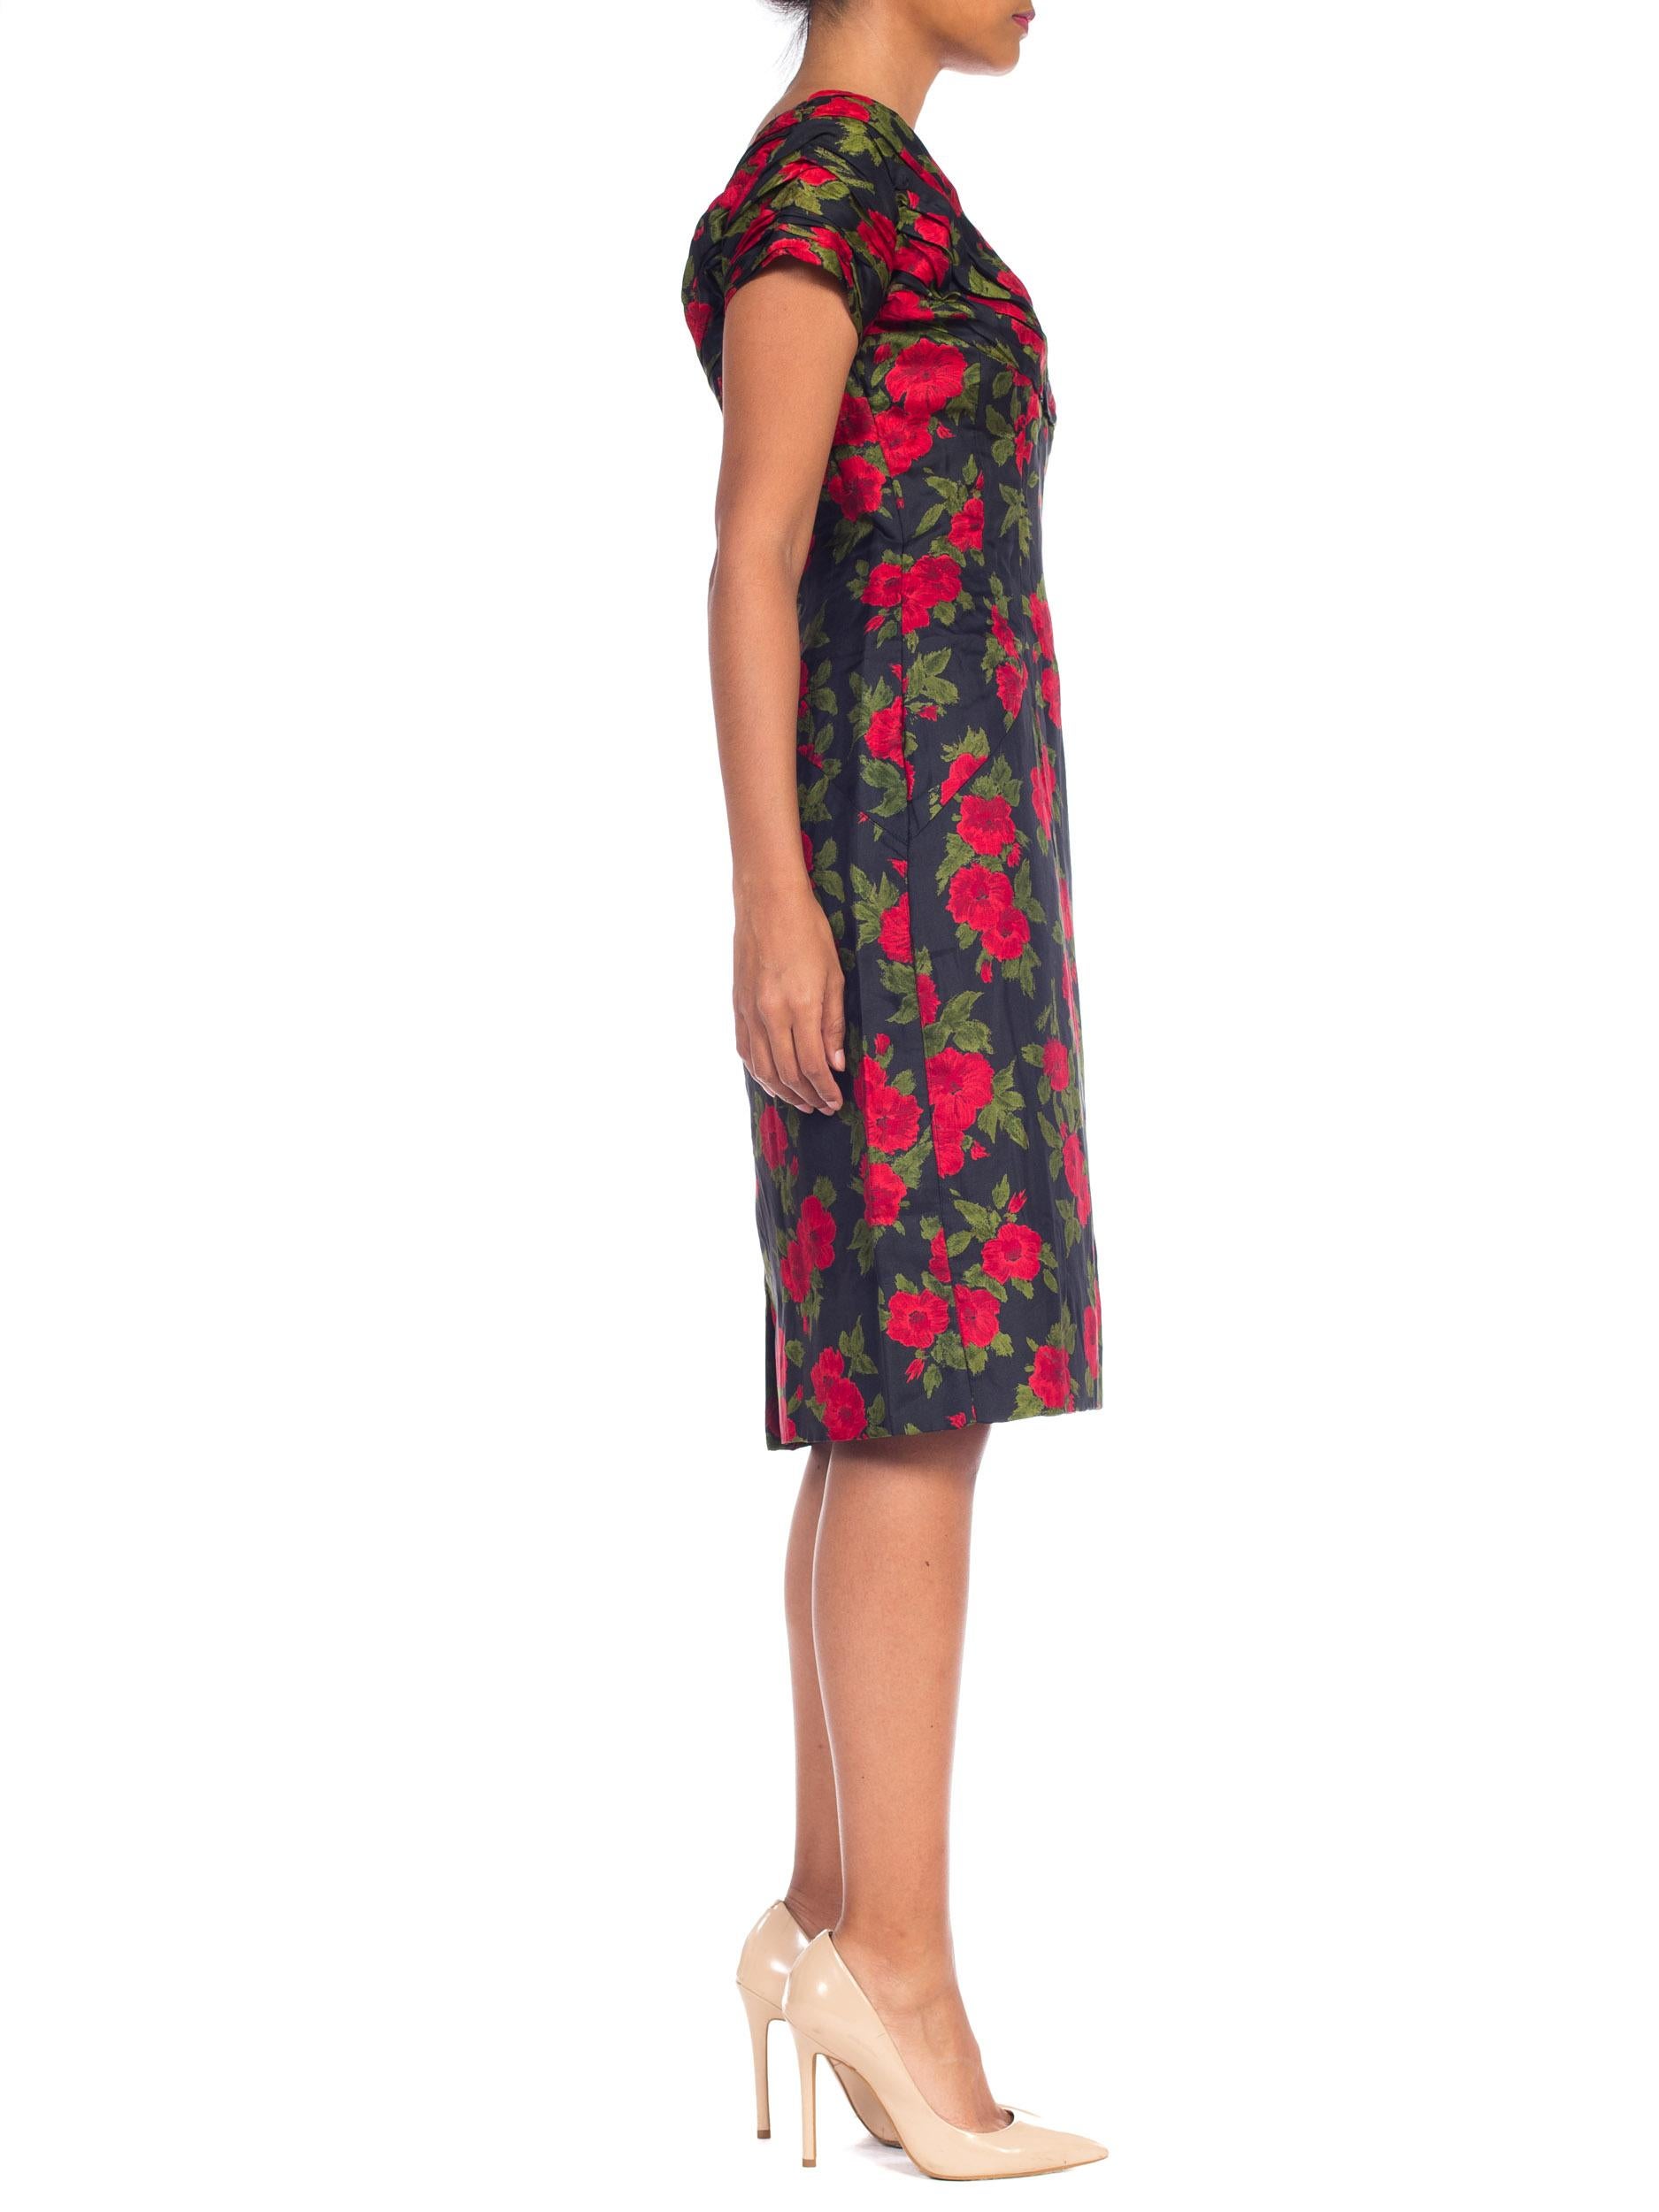 1950S DOLCE & GABBANA Style Silk Twill Red Black Classic Rose Floral Printed Dr For Sale 2